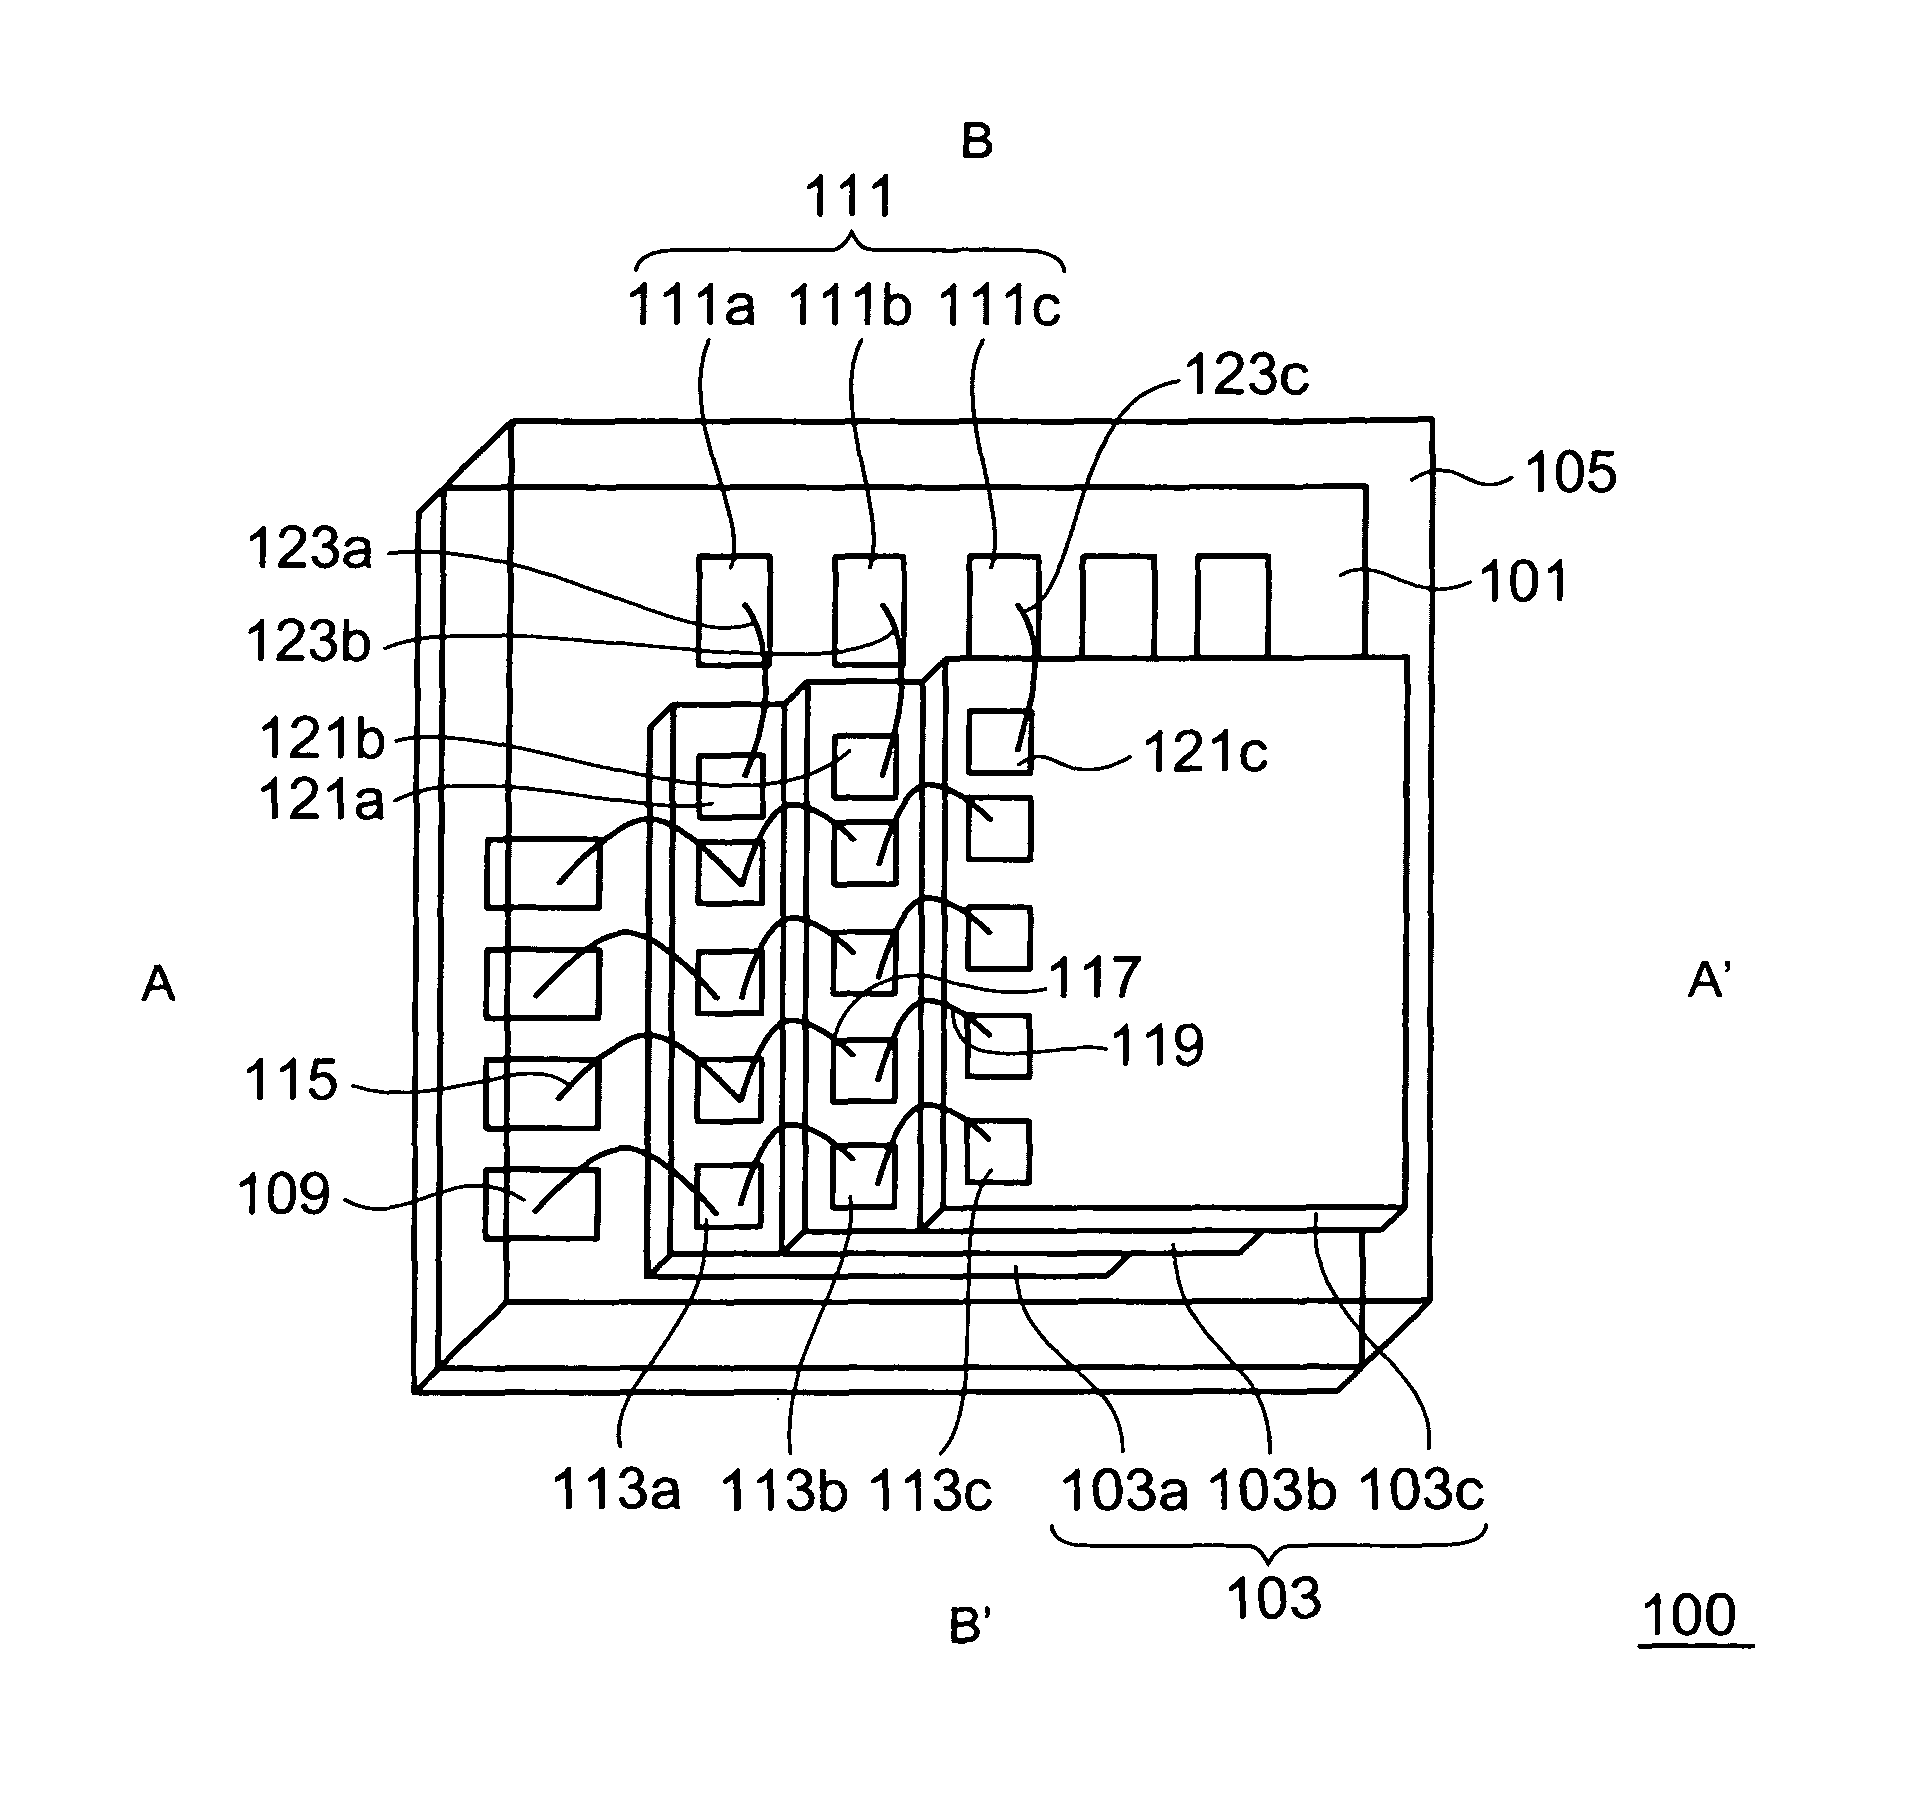 Semiconductor device including mounting board with stitches and first and second semiconductor chips